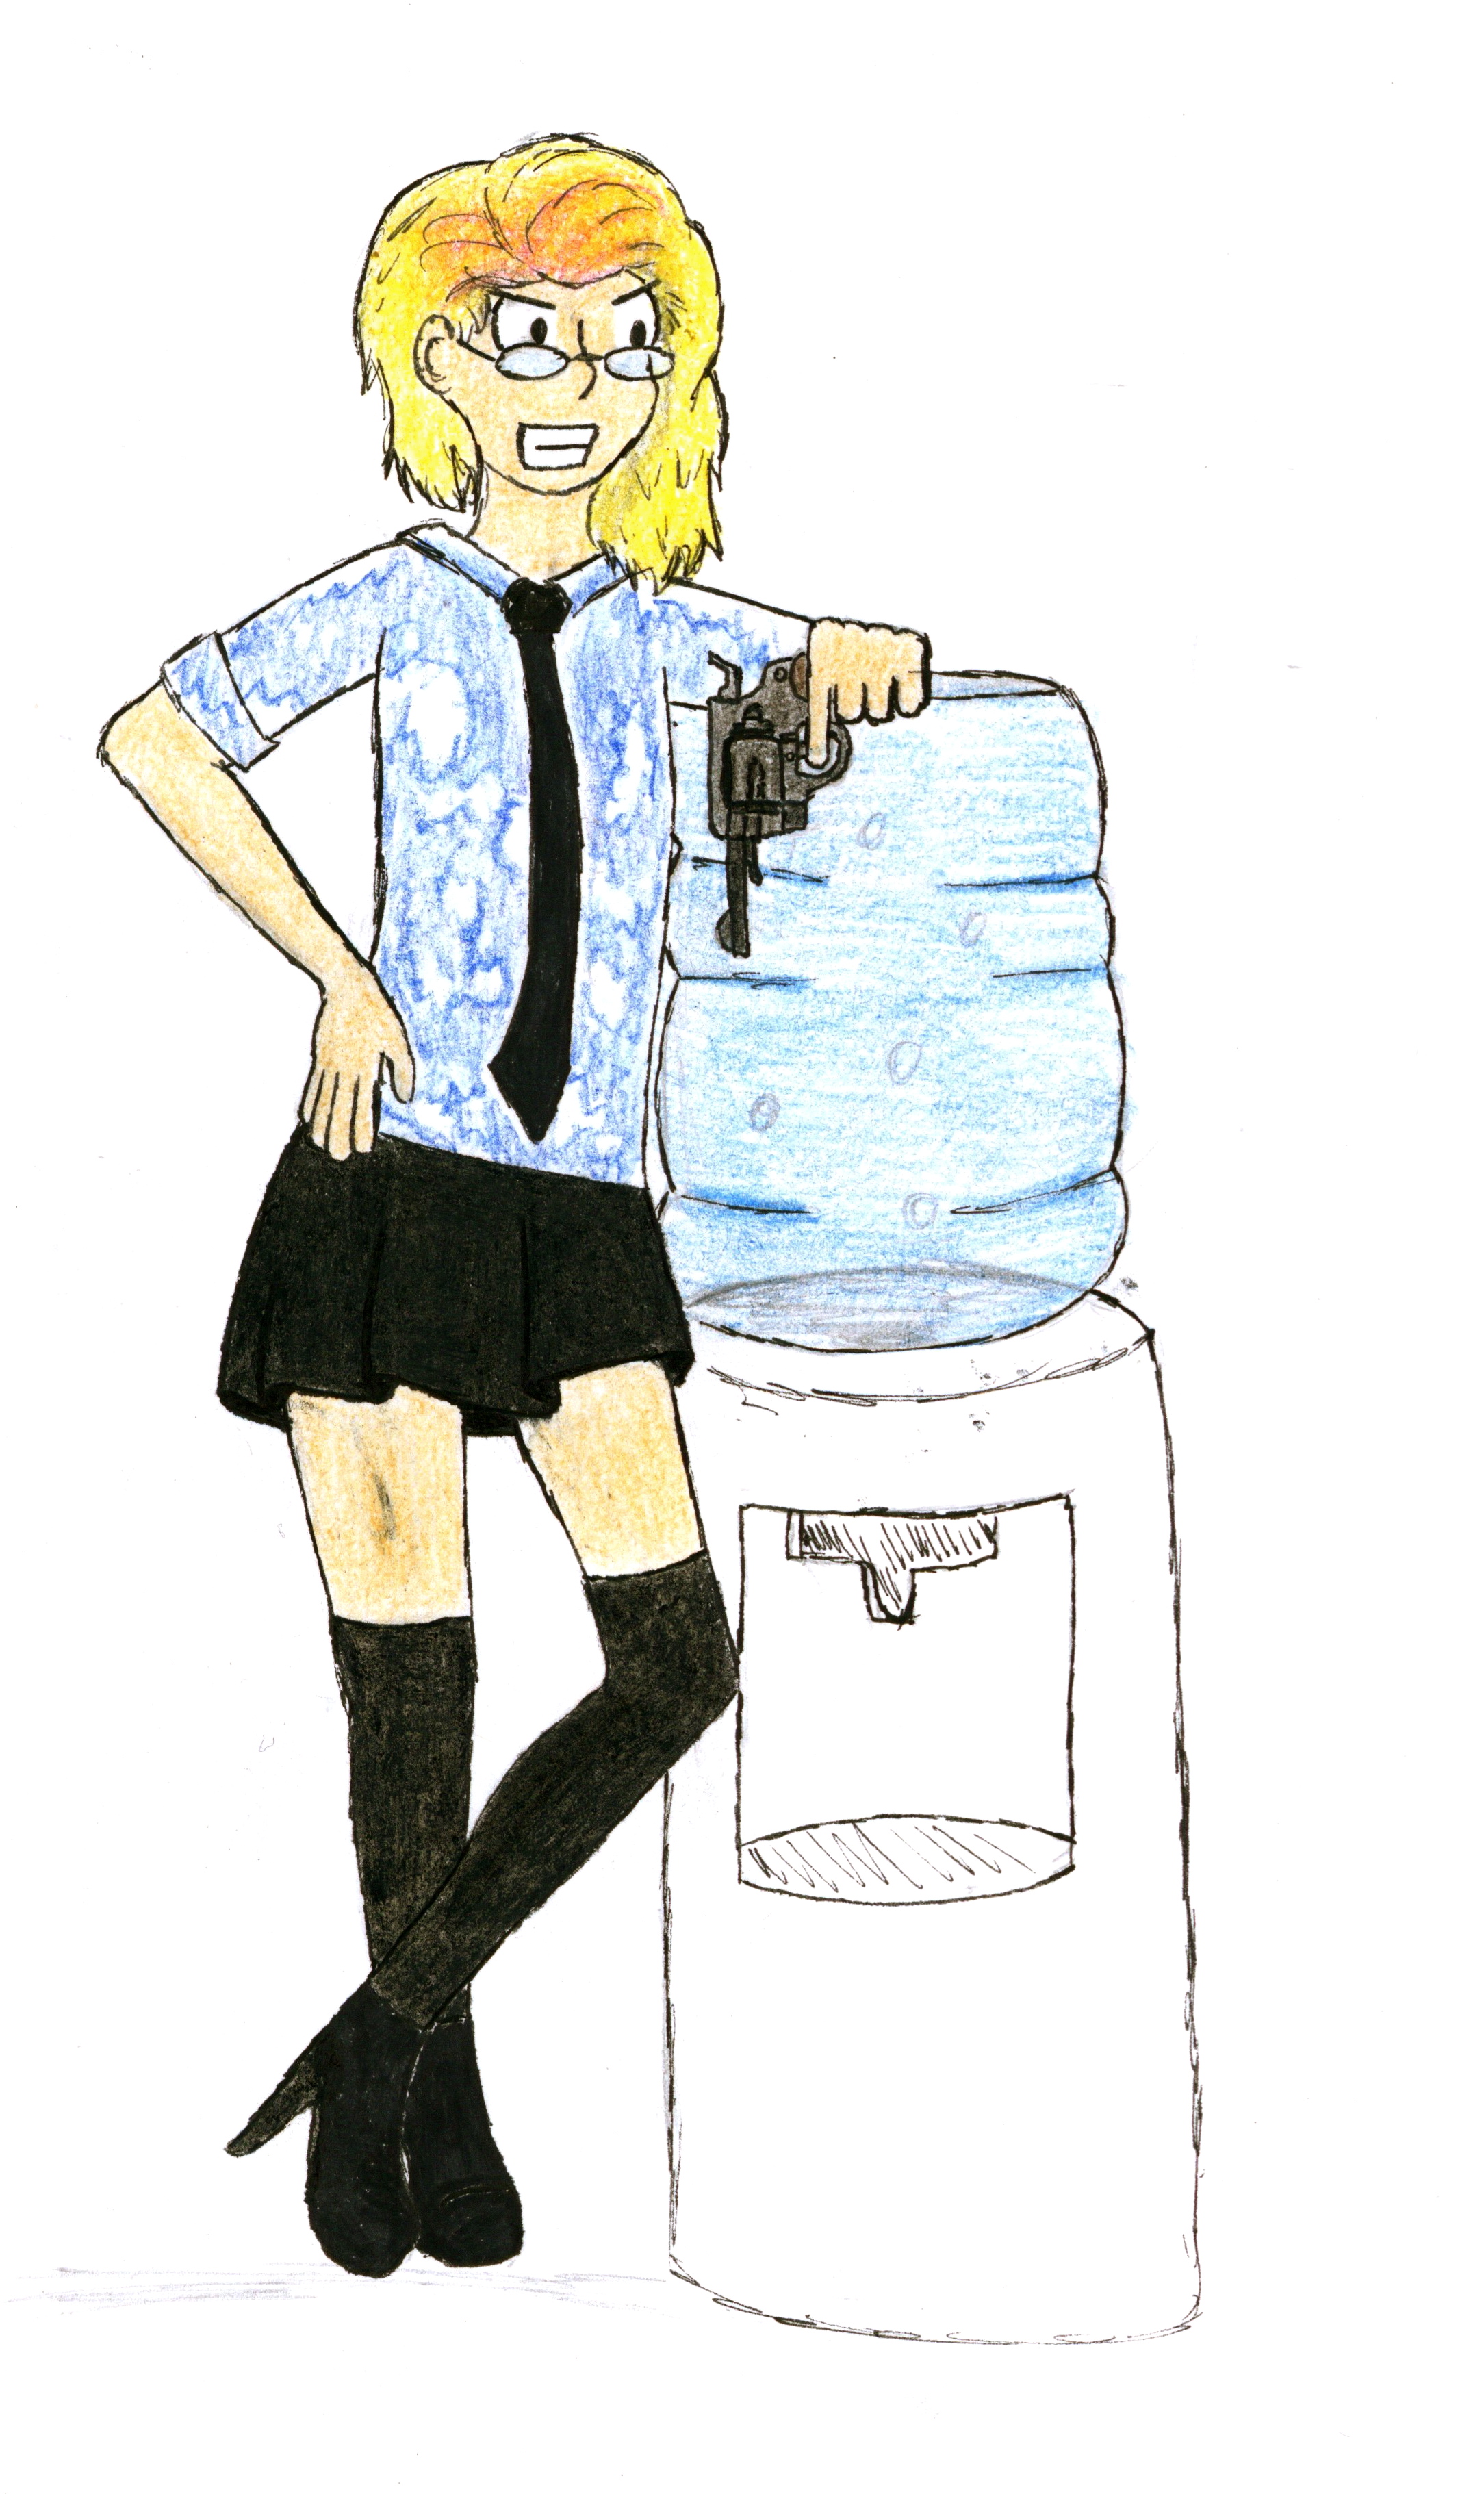 Tip and Water Cooler by Tuiteyfruity